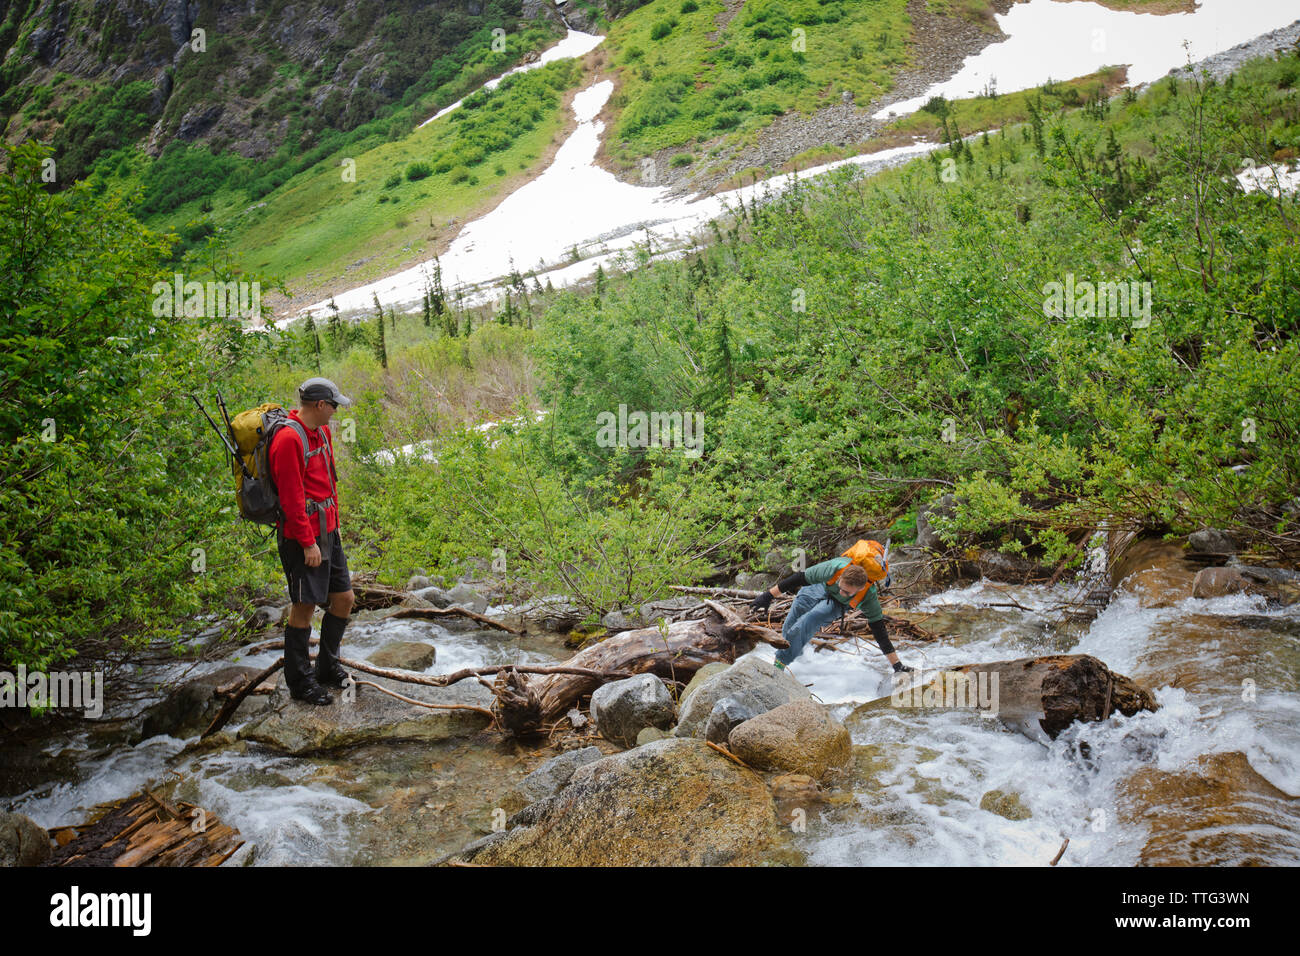 Backpackers carefully crosses a raging river. Stock Photo